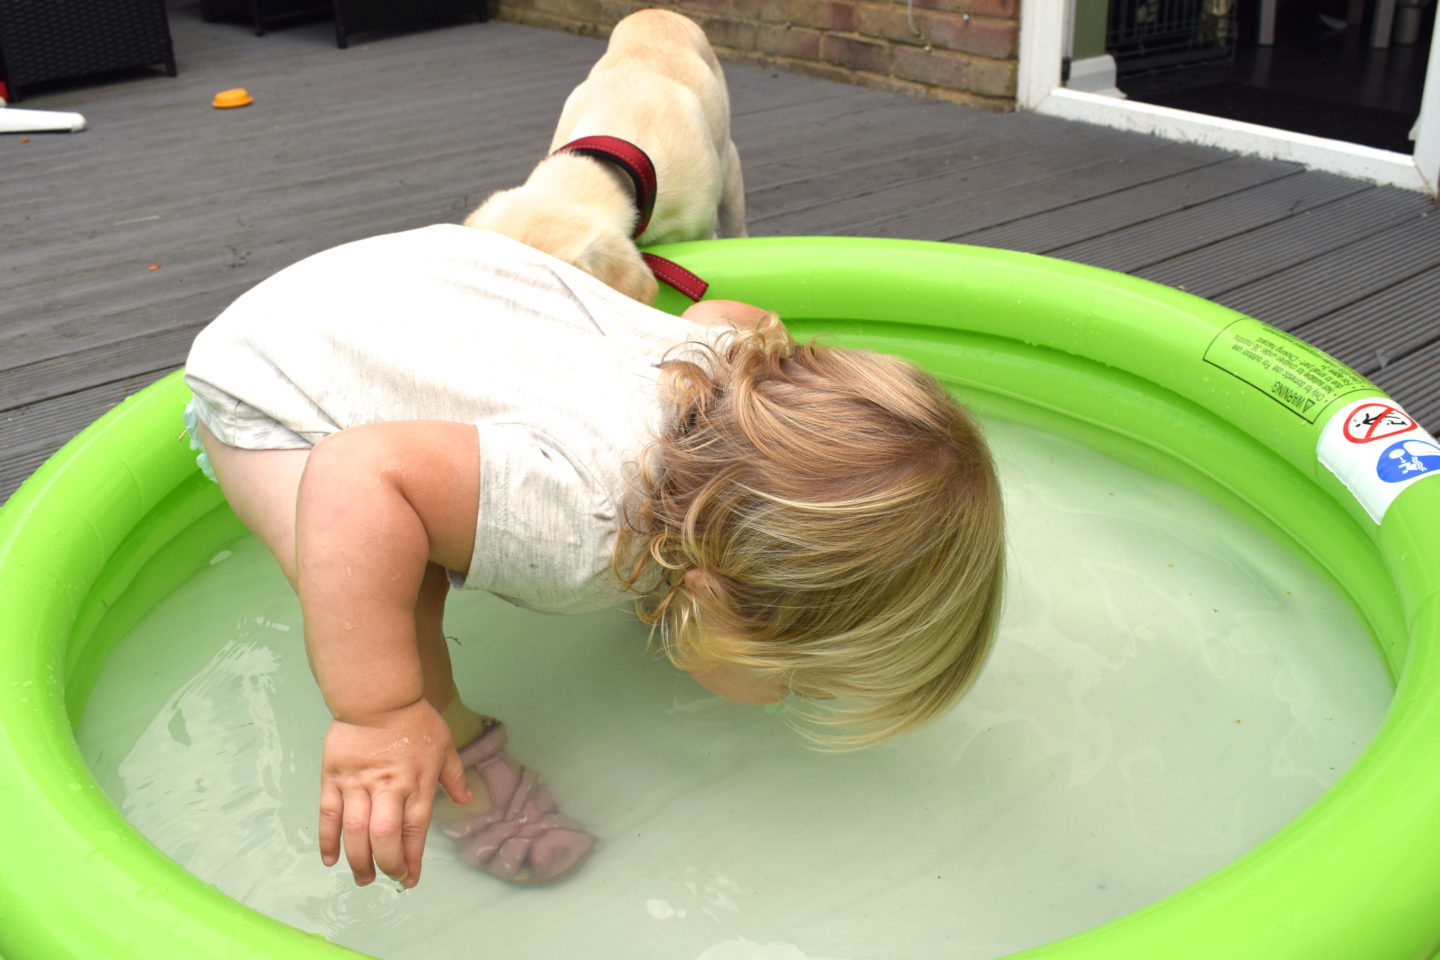 18 month old girl drinking from a paddling pool, copying puppy